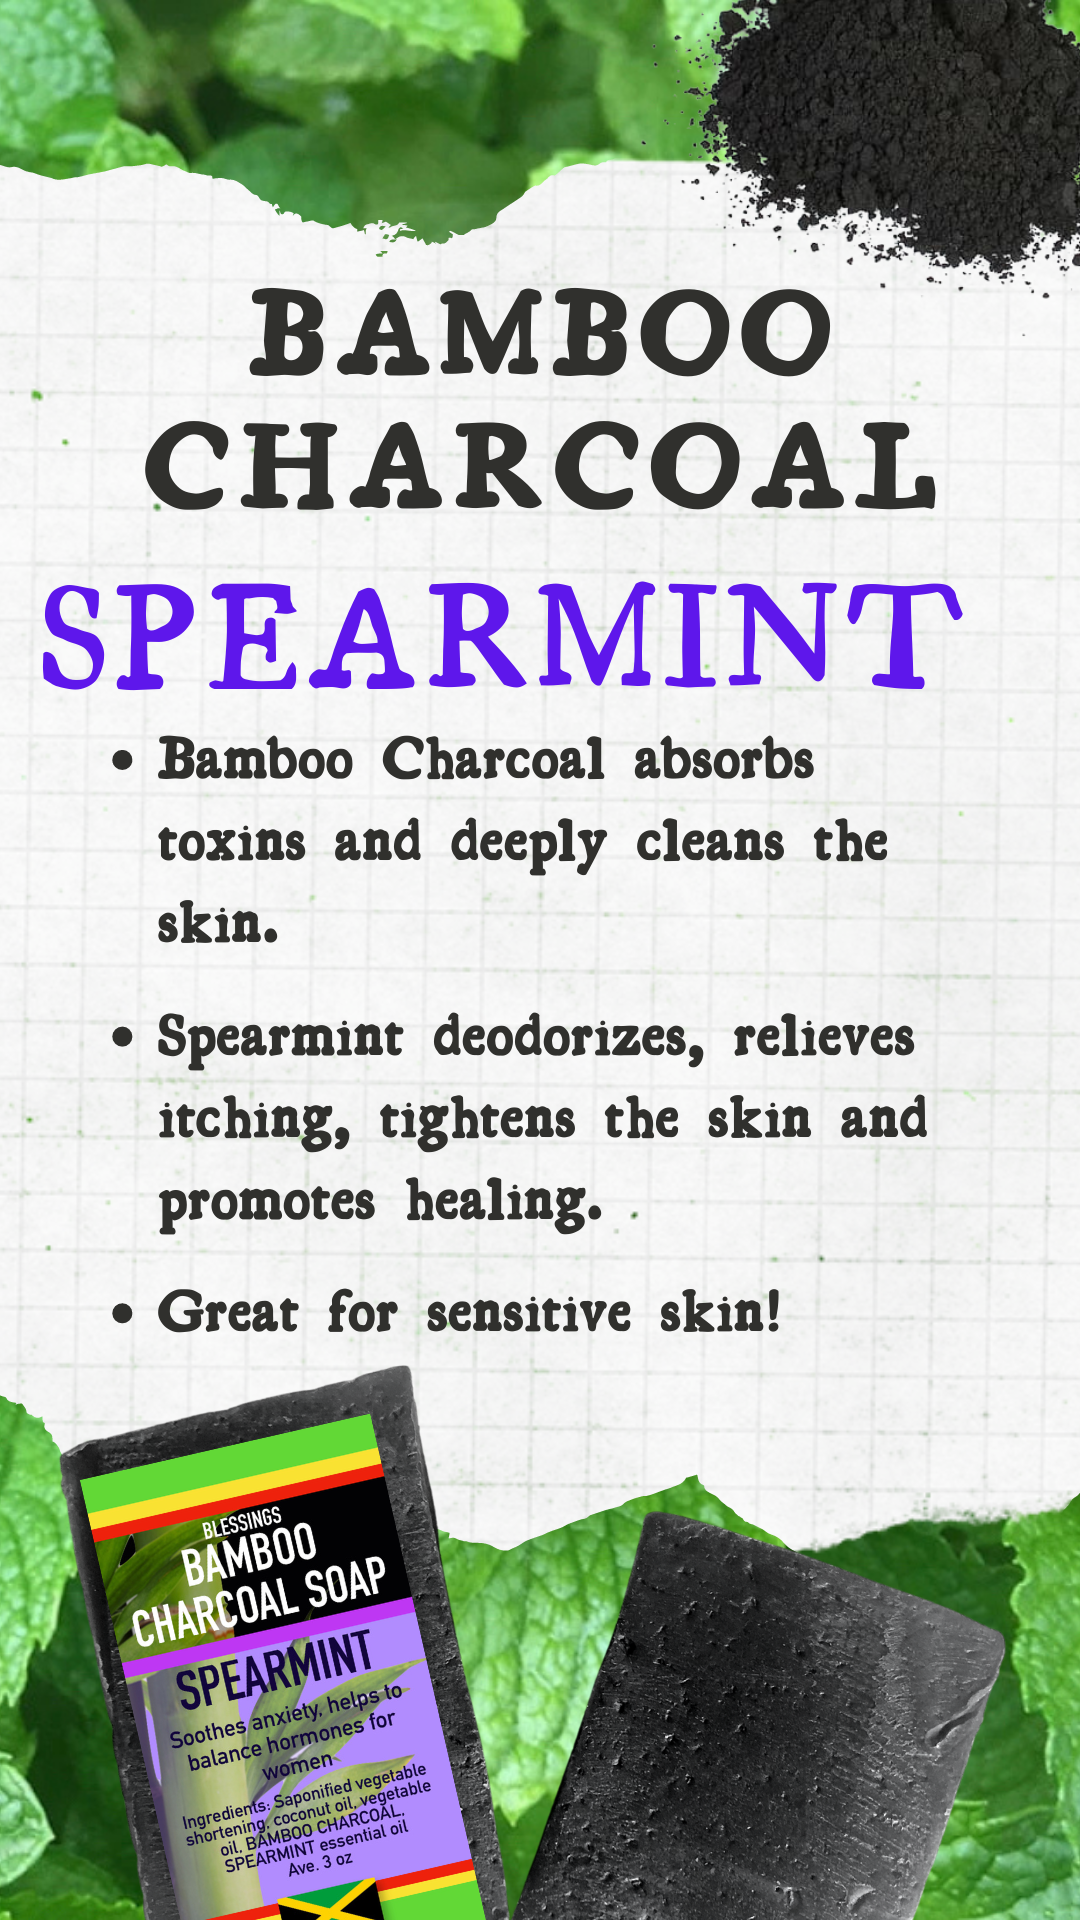 Bamboo Charcoal Spearmint Soap